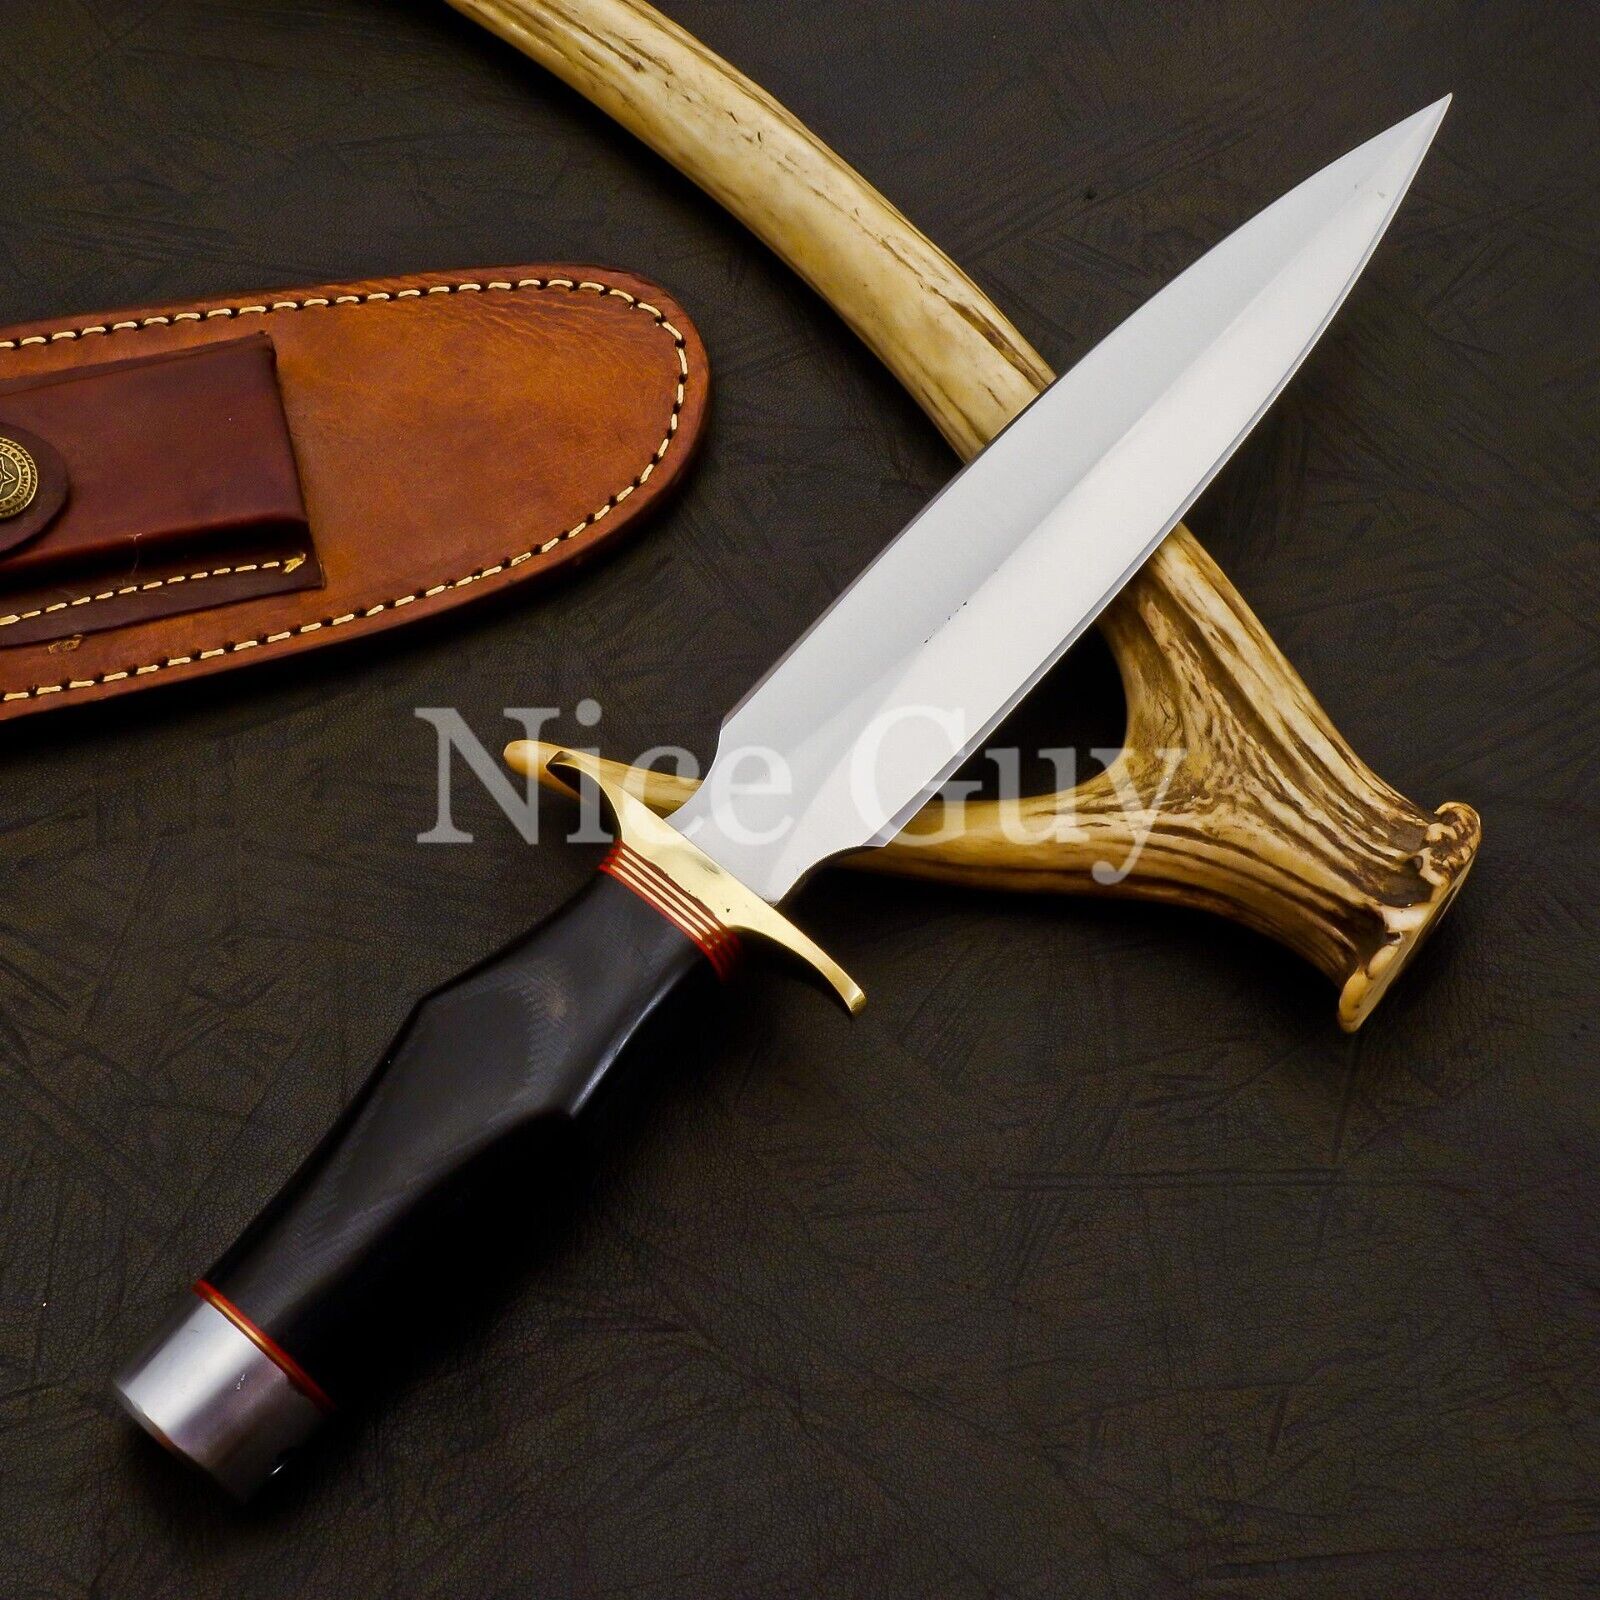 Handmade Randall Model 2 Style Steel Hunting Dagger, Tactical Knive, Bowie knife